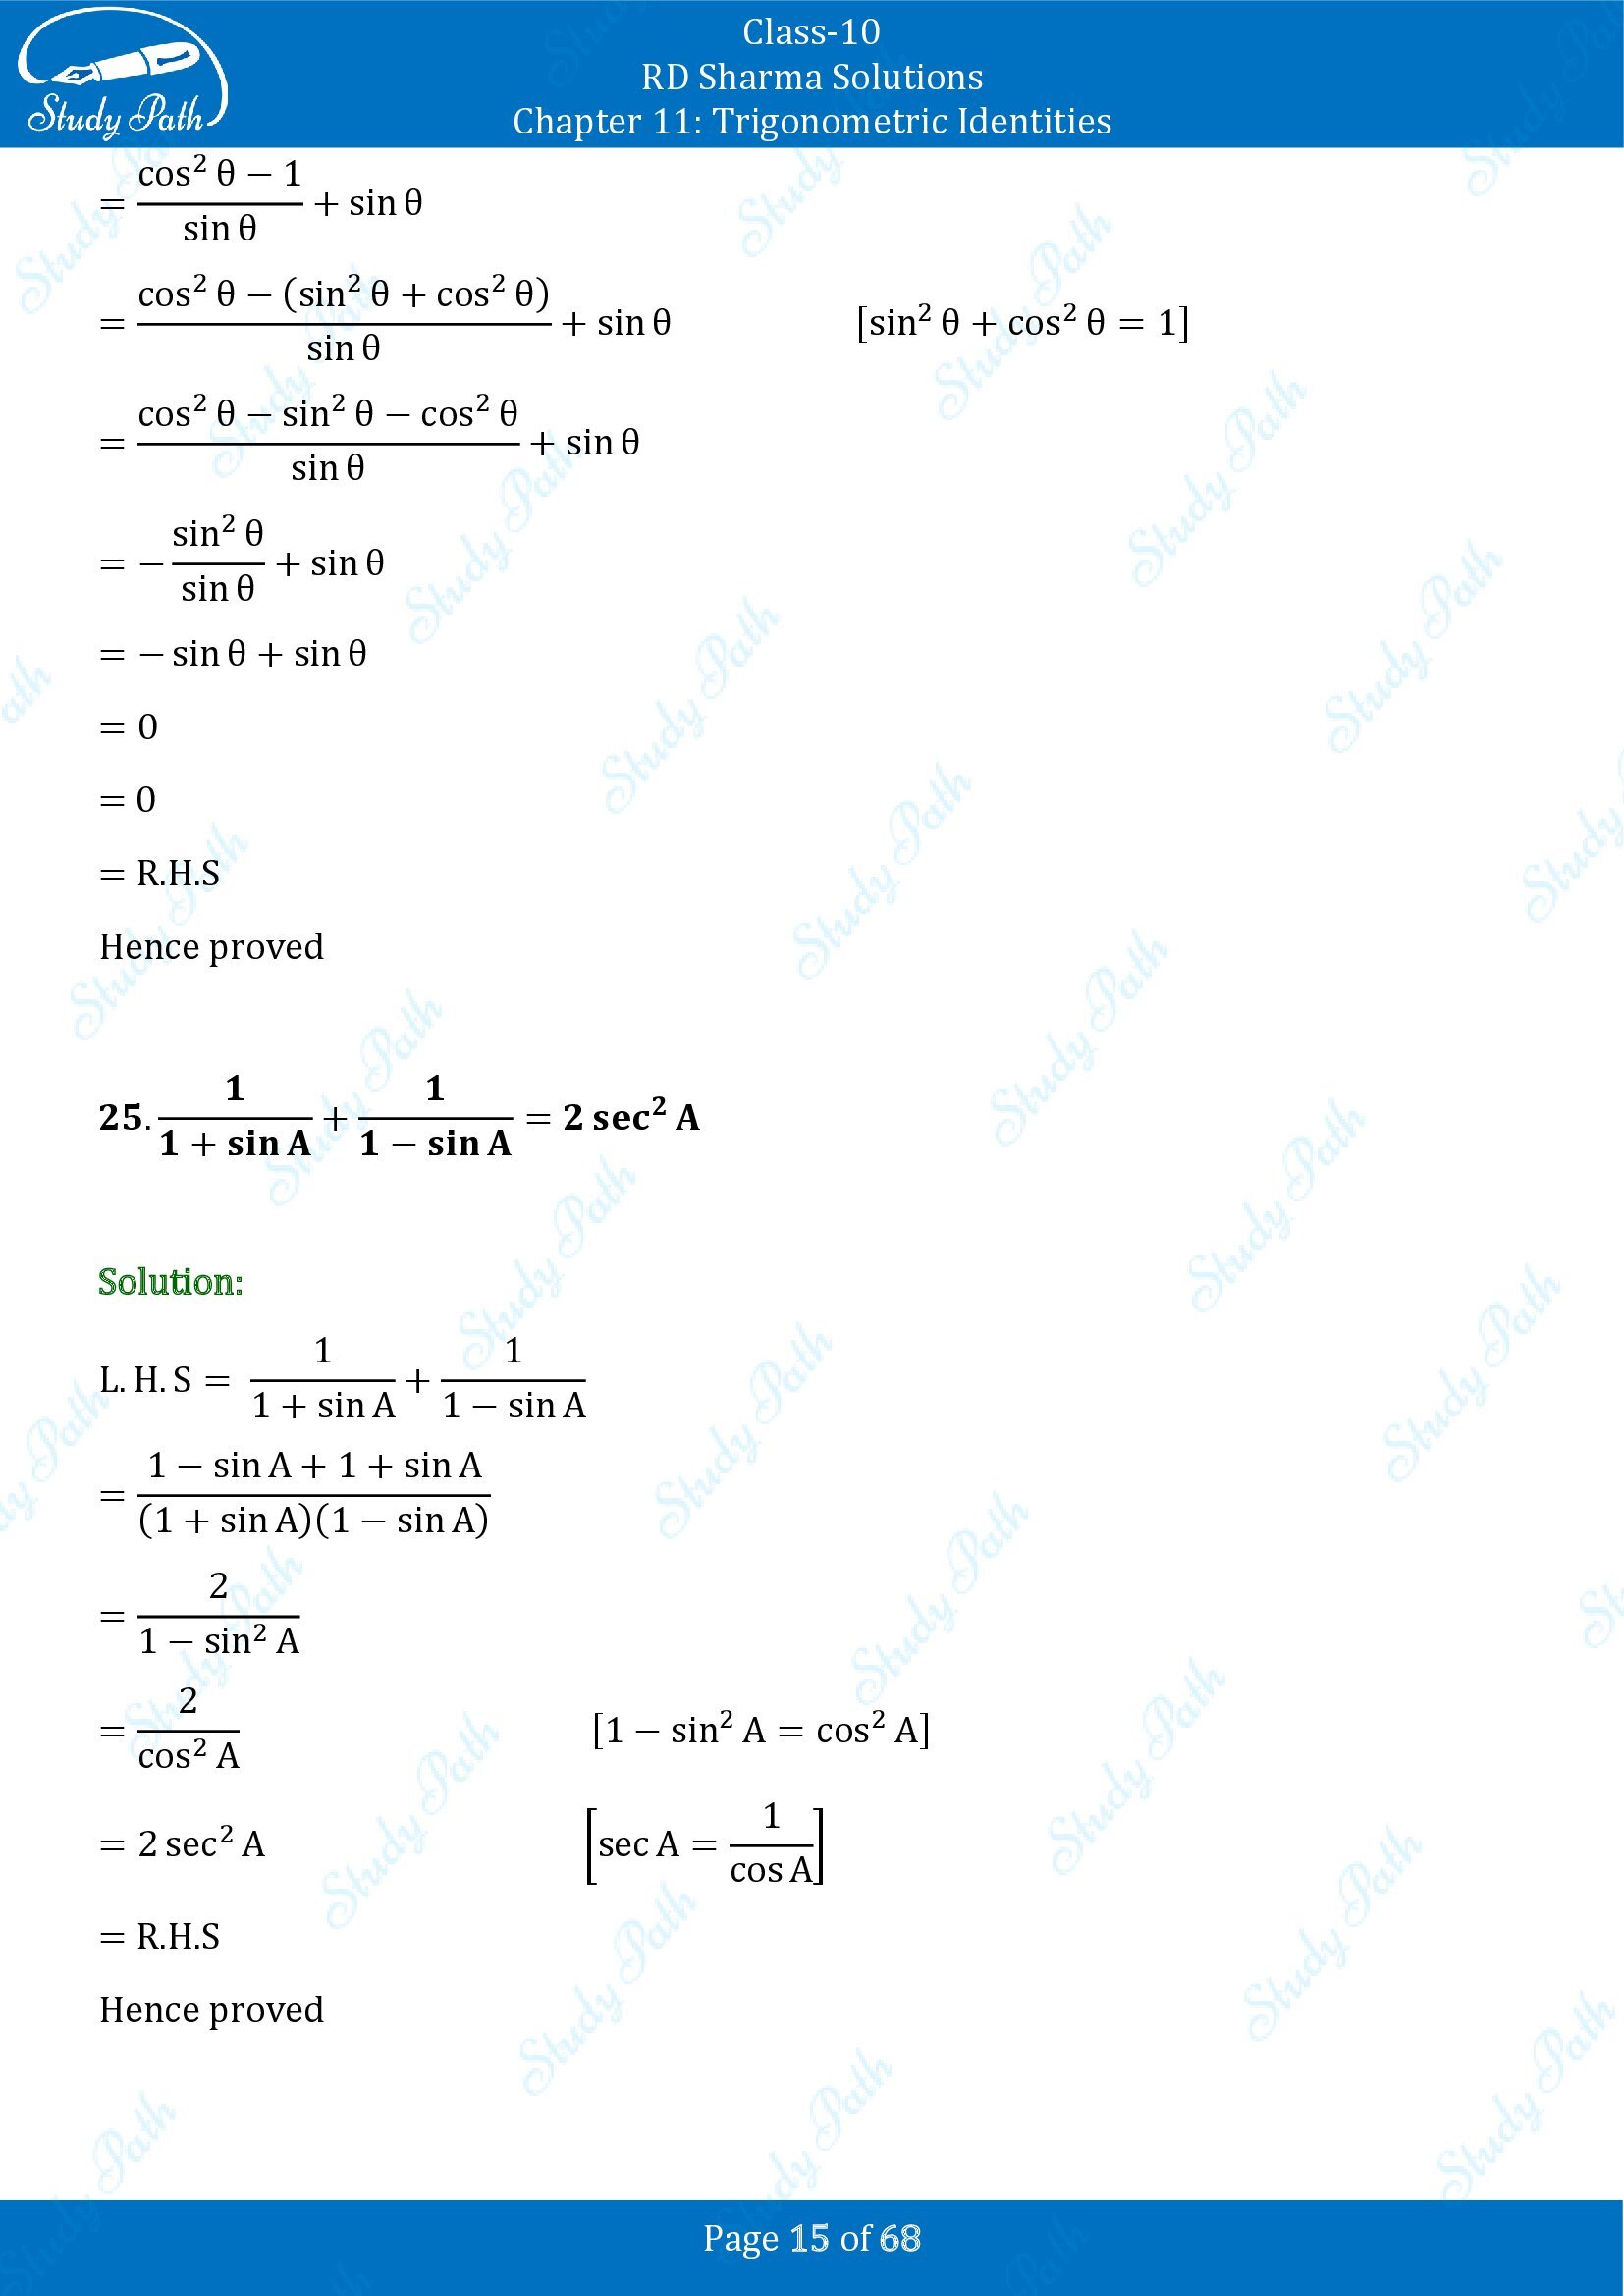 RD Sharma Solutions Class 10 Chapter 11 Trigonometric Identities Exercise 11.1 00015